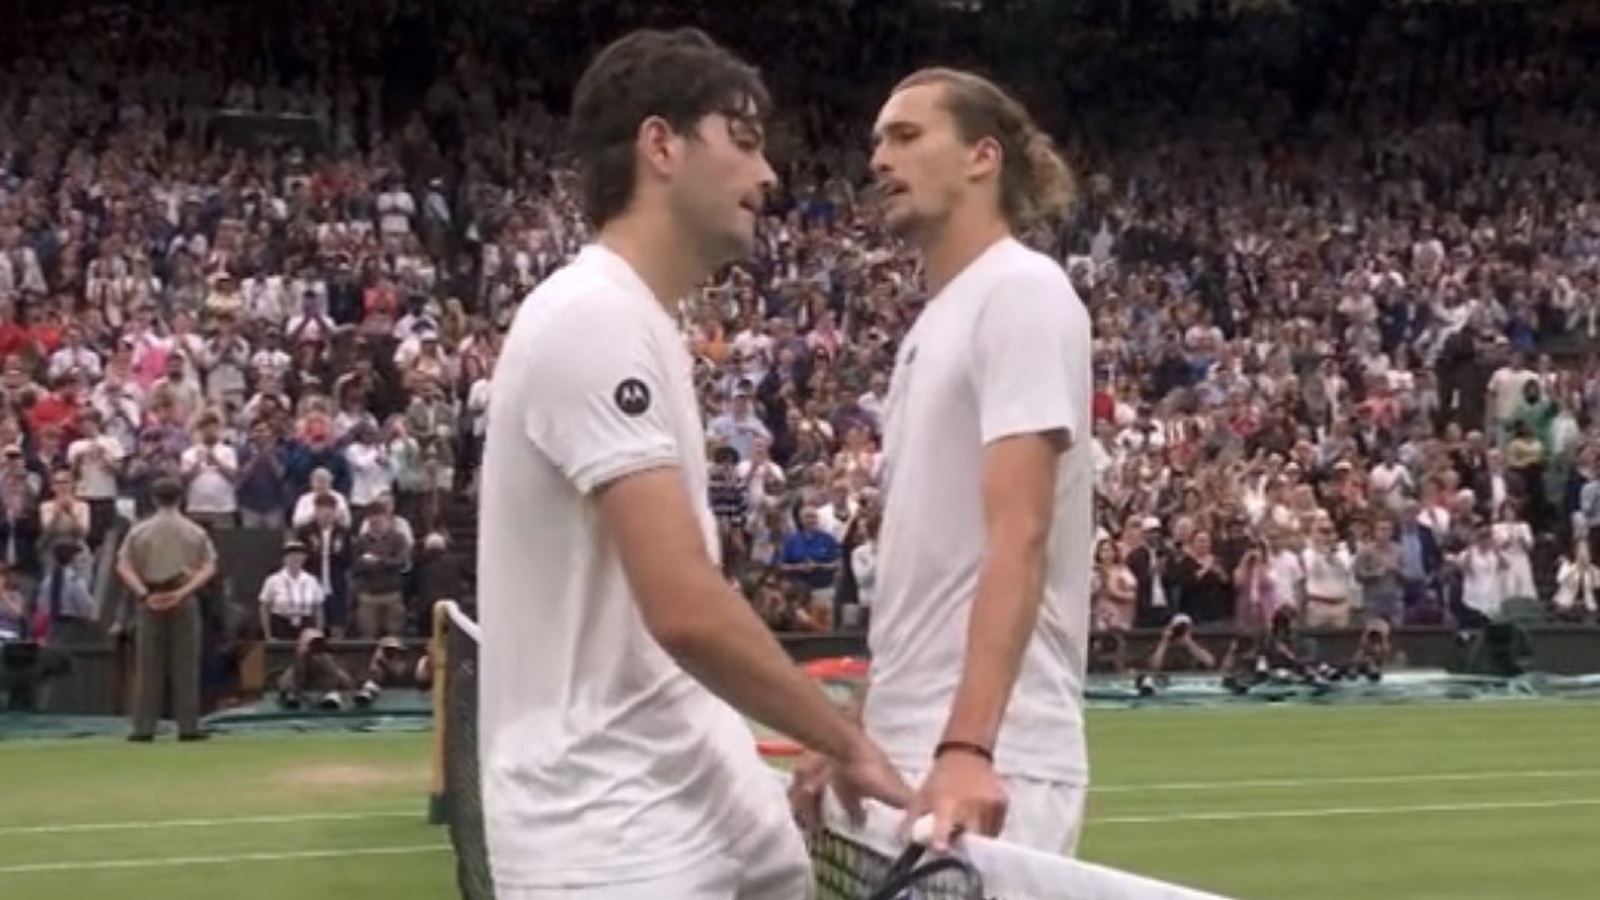 Alexander Zverev had a message for Taylor Fritz after the match